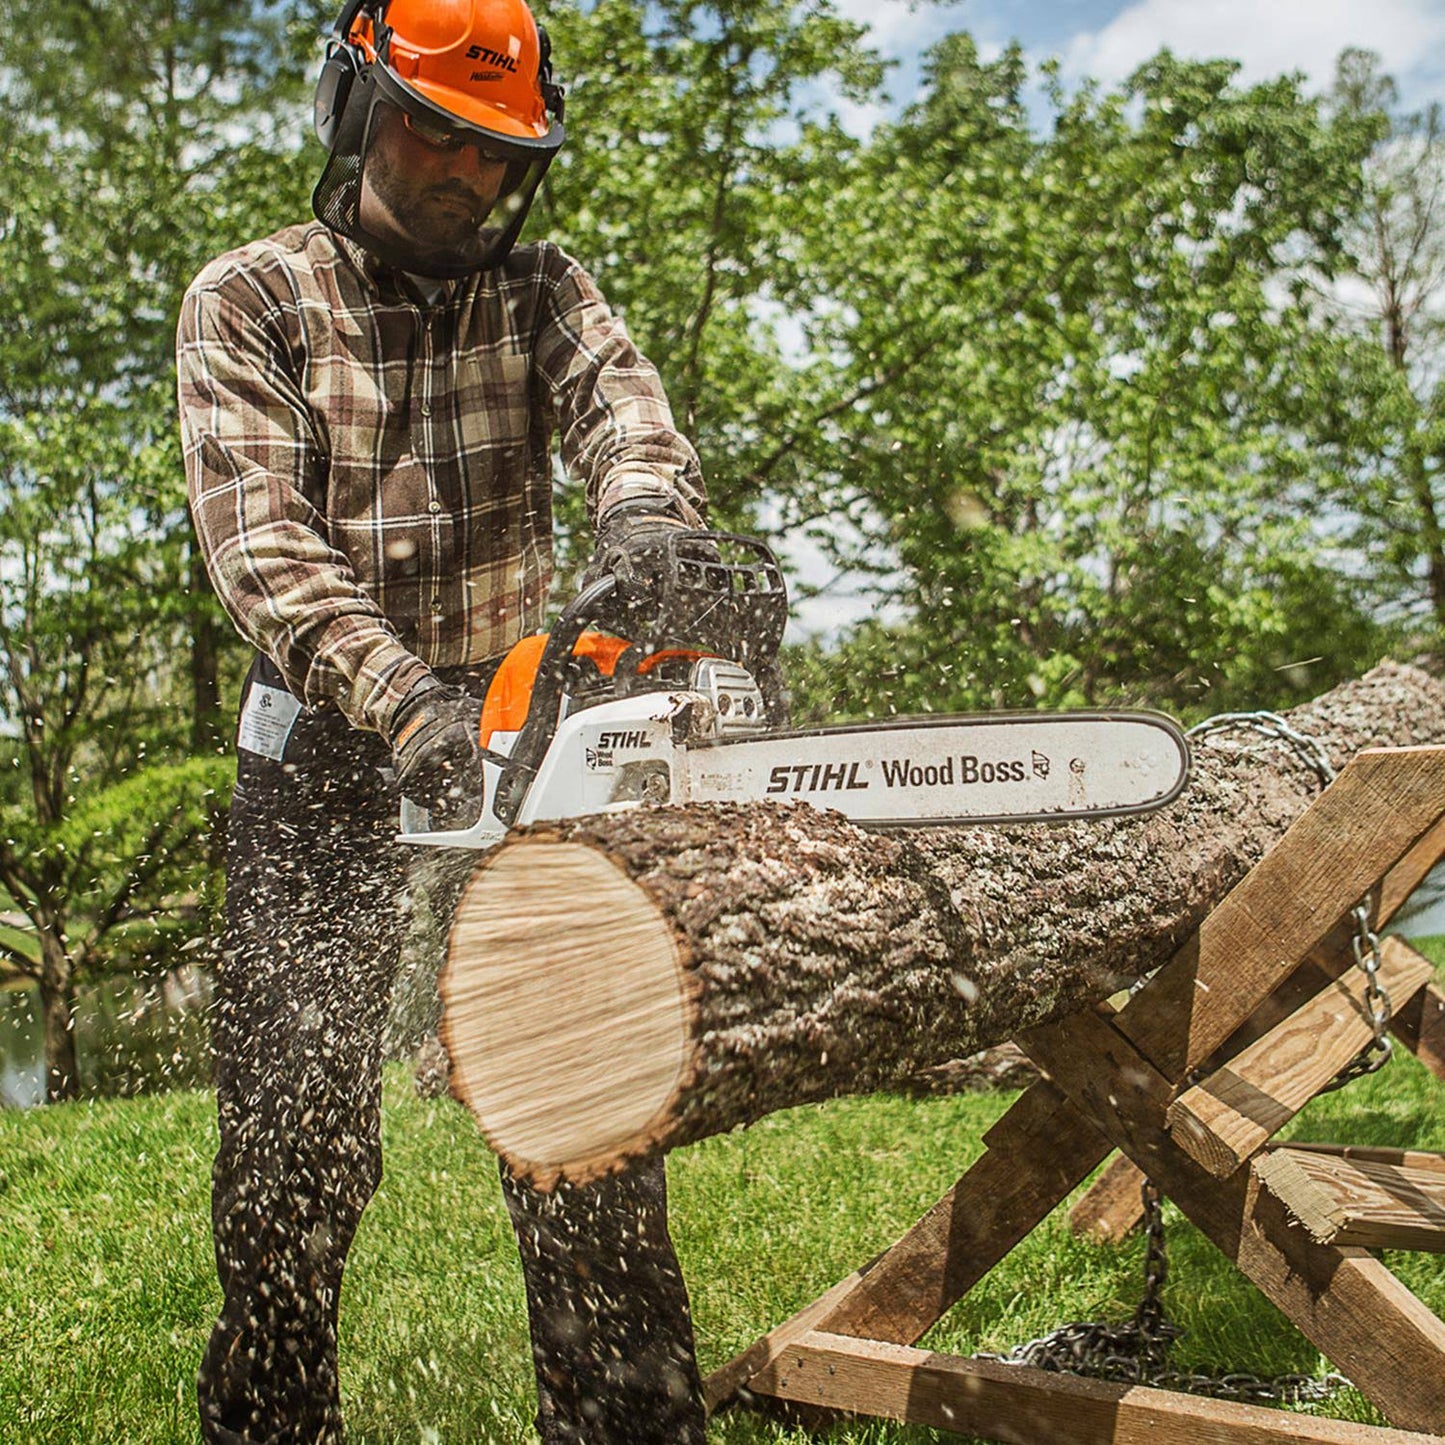 Stihl MS 251 Wood Boss Chainsaw 18in